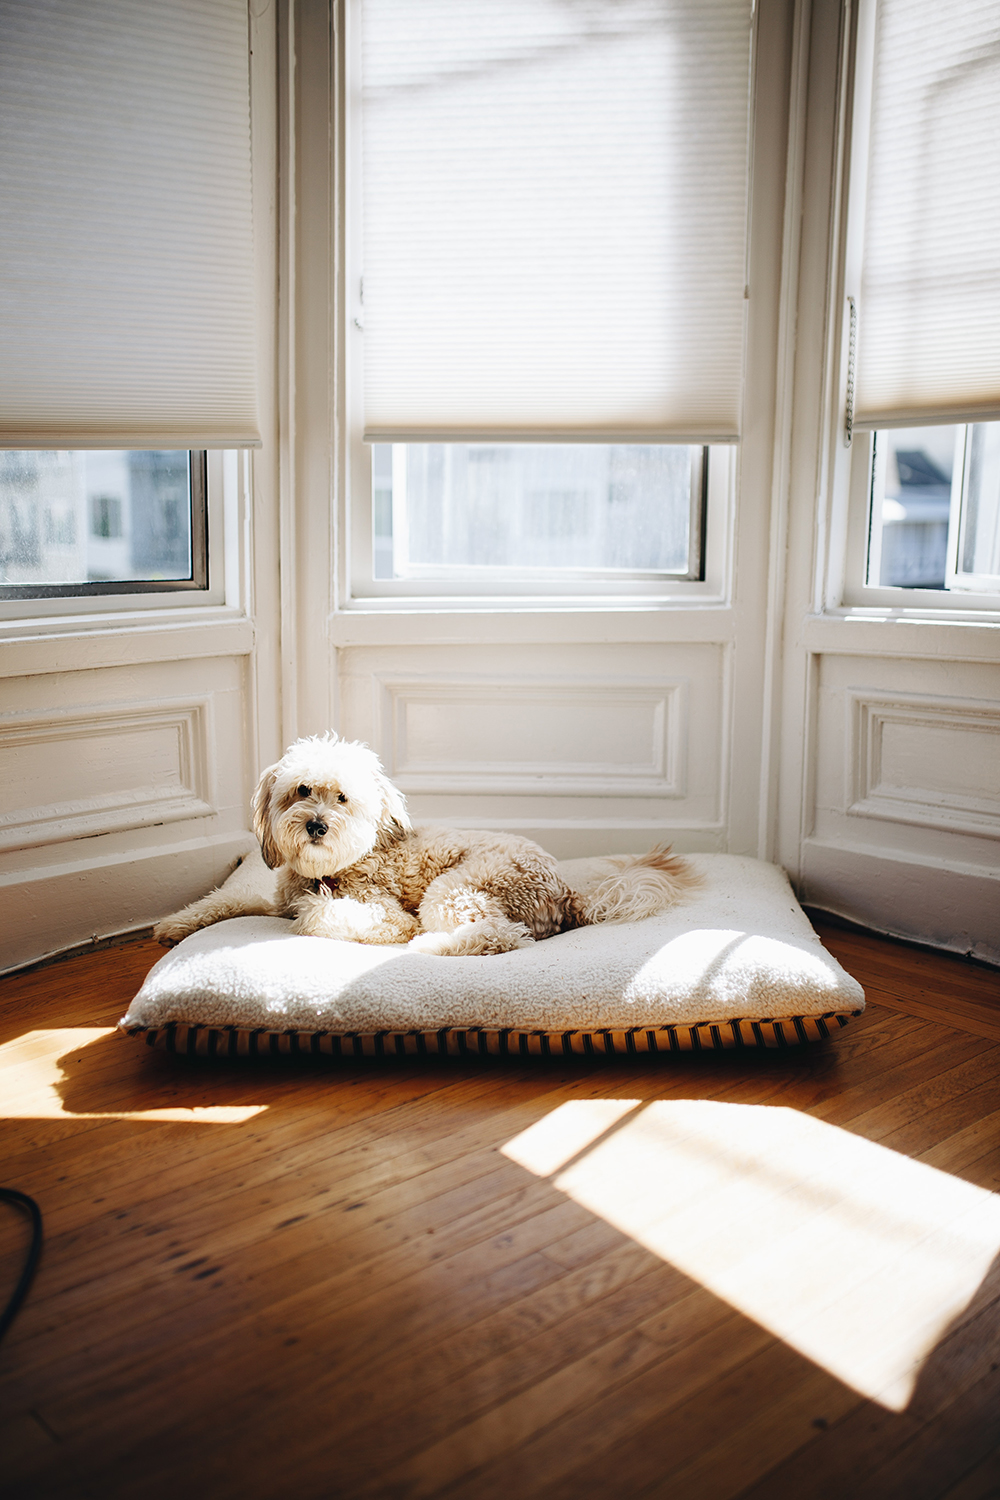 A dog lying in a bed in front of windows covered with cordless blinds.